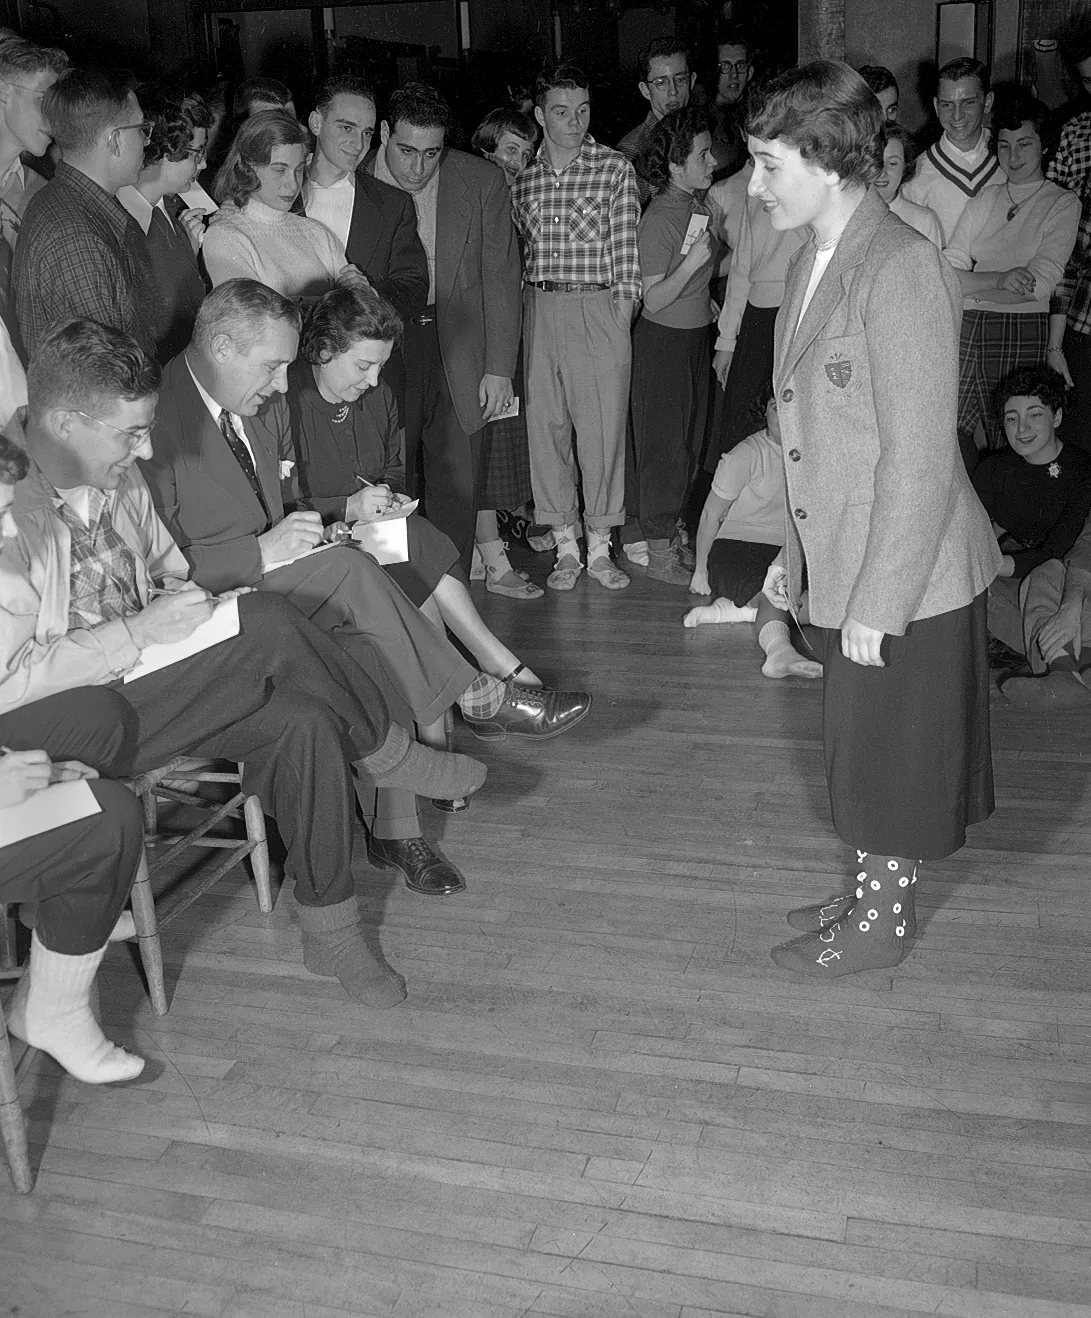 Group of people standing and sitting, looking at the socks of a standing person.